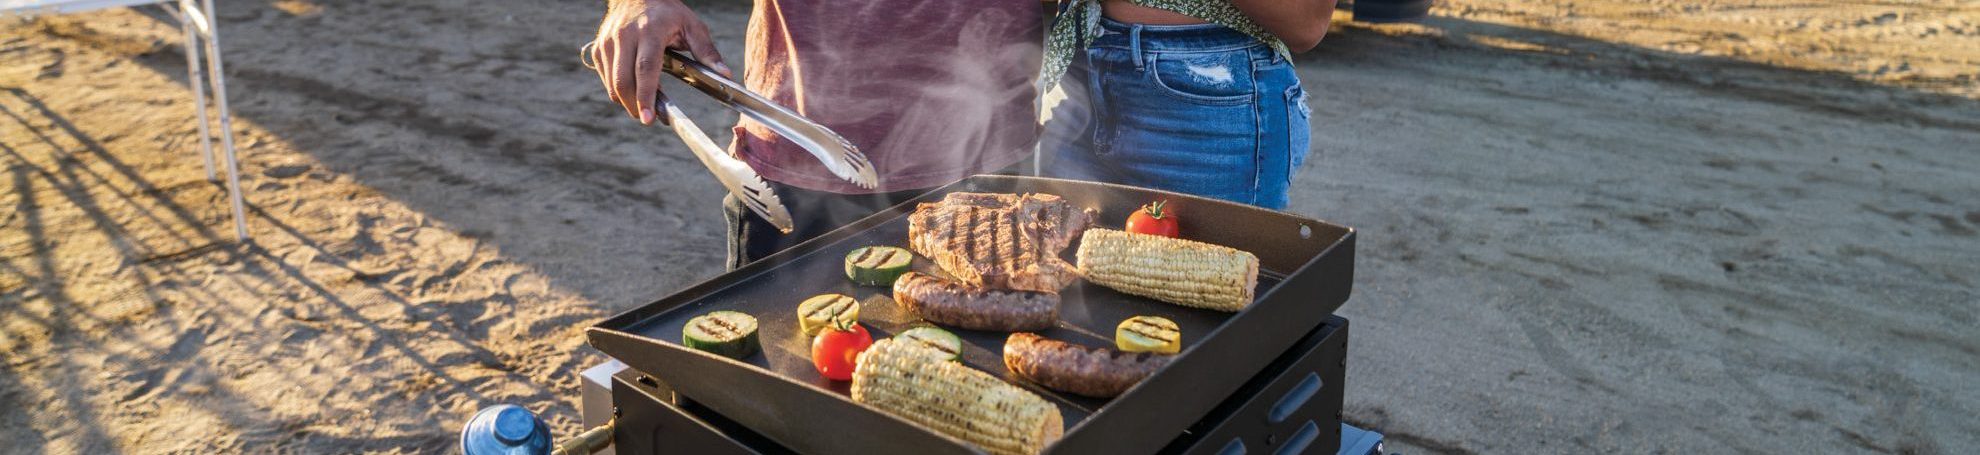 grilling and camping